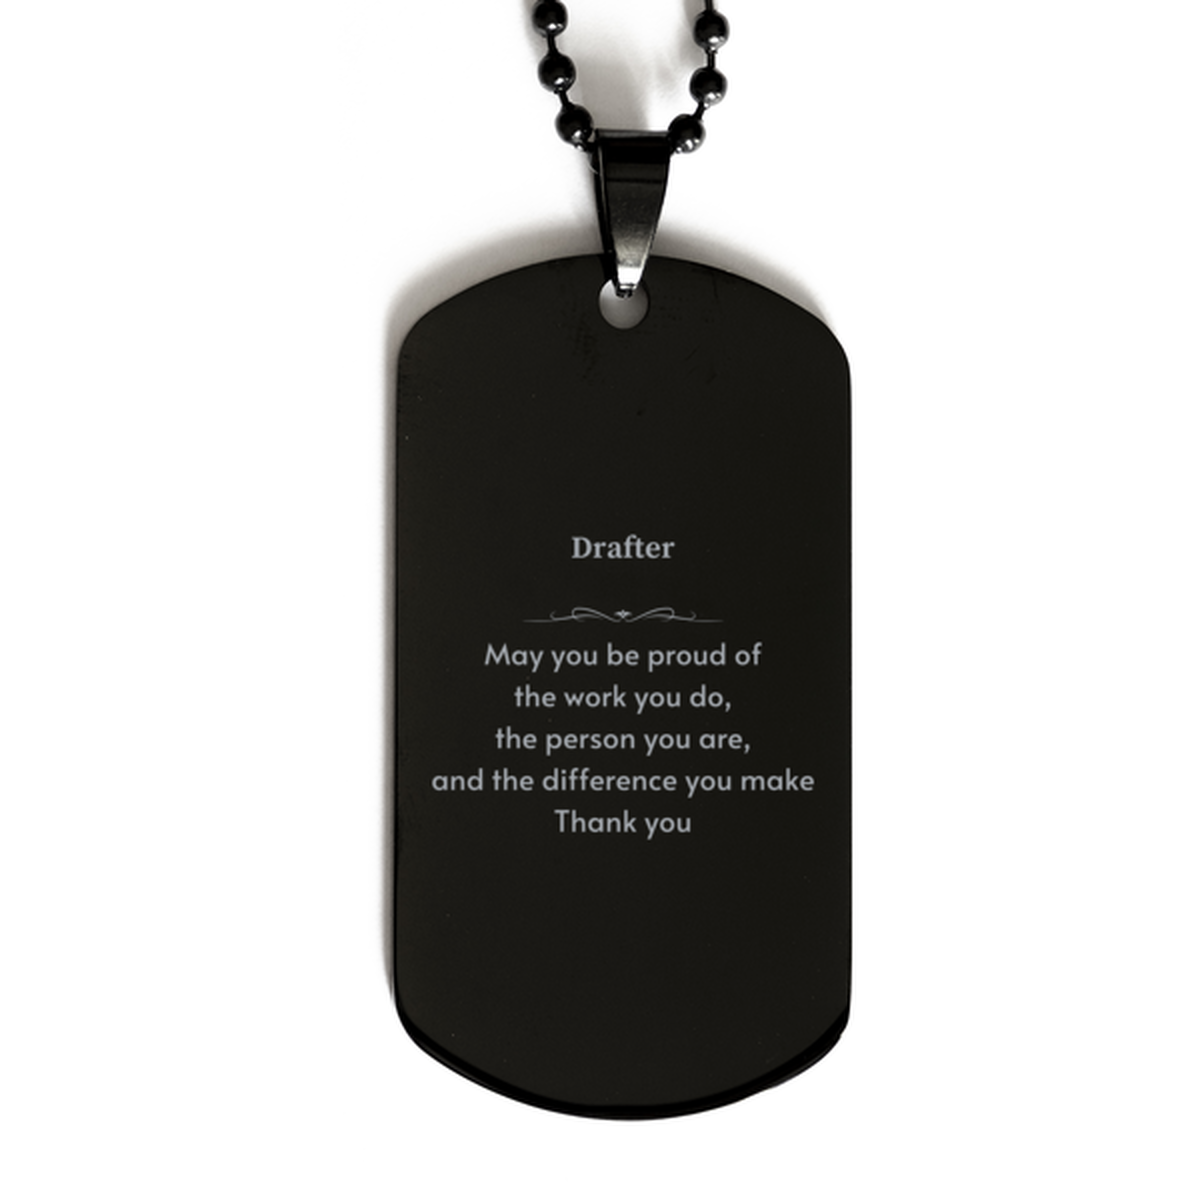 Heartwarming Black Dog Tag Retirement Coworkers Gifts for Drafter, Drafter May You be proud of the work you do, the person you are Gifts for Boss Men Women Friends